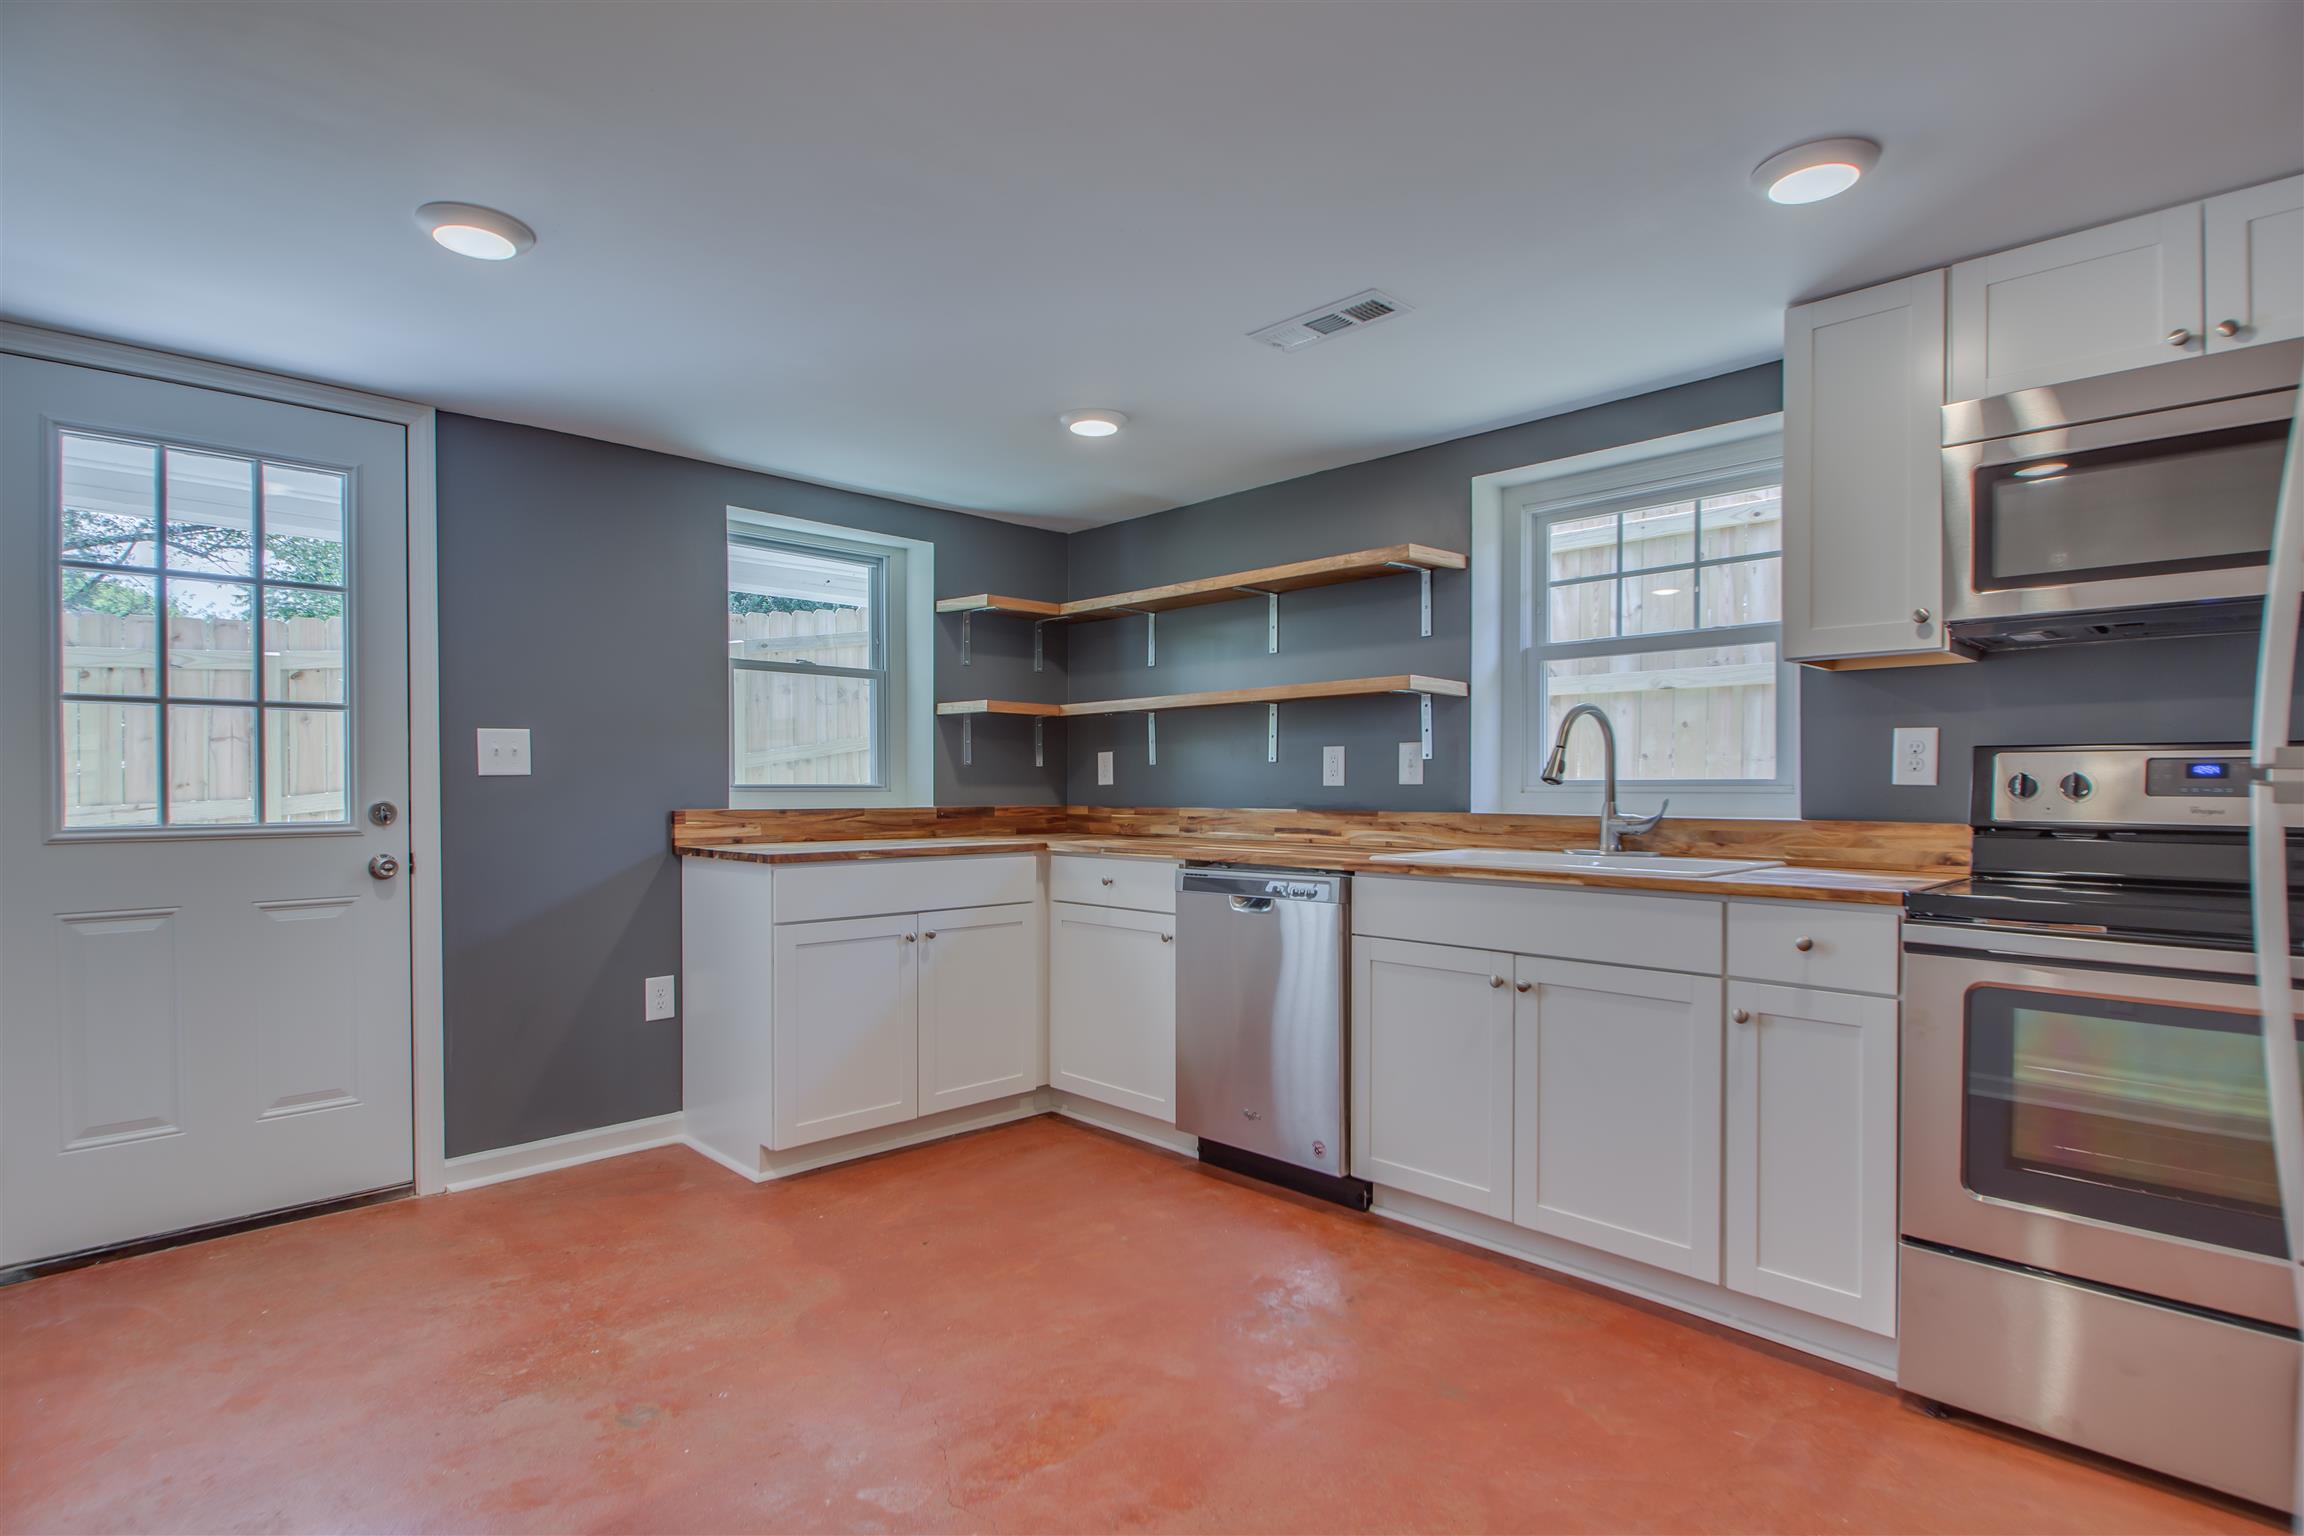 Welcome to this Bright, Completely Renovated Kitchen equipped with ALL NEW EVERYTHING!